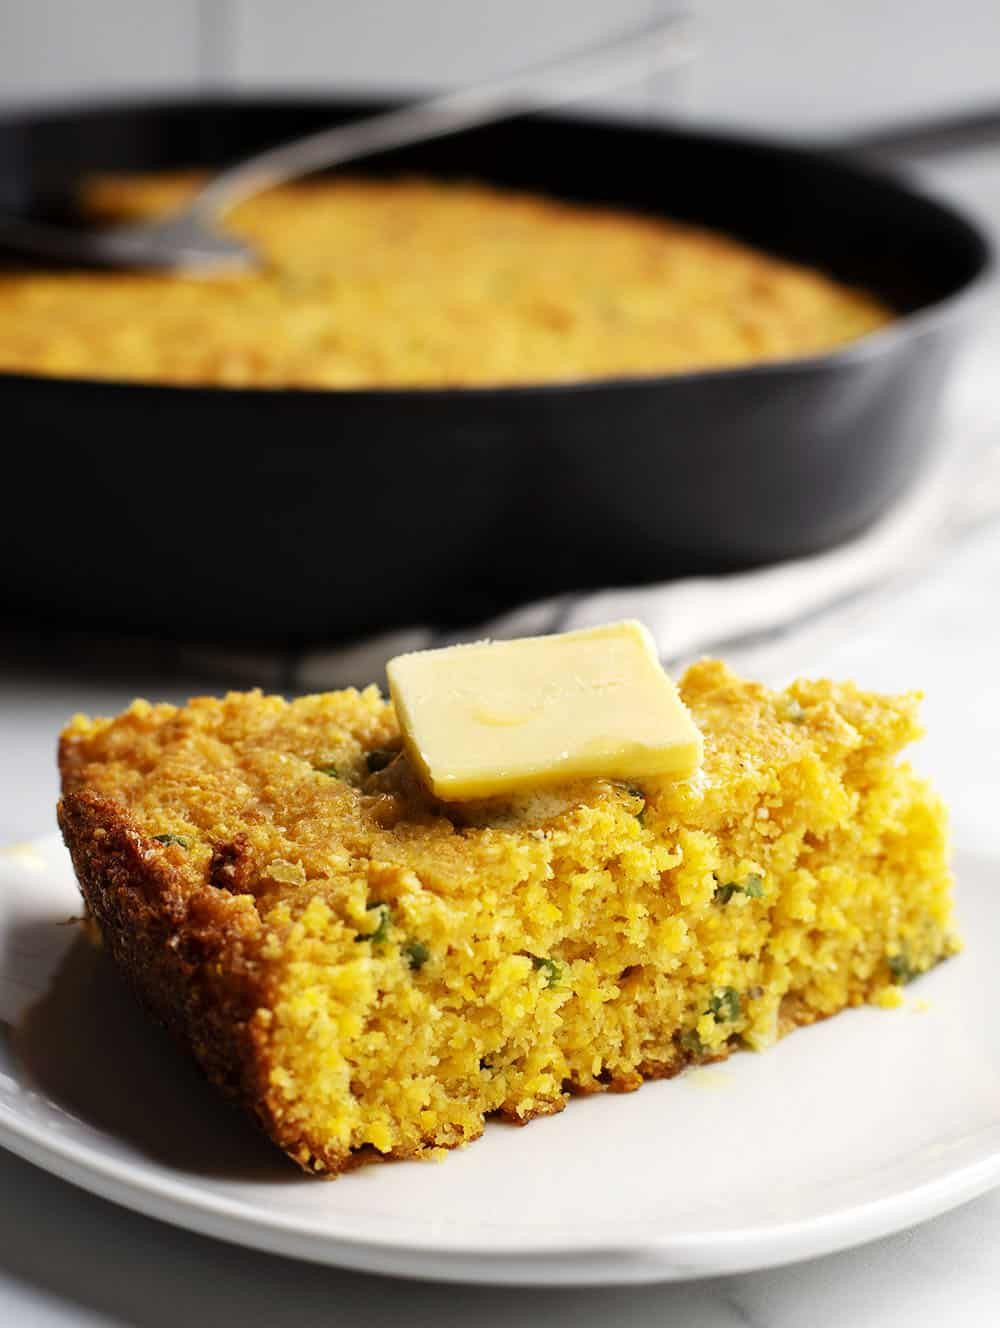 Easy Mexican Cornbread Recipe Compilation – Easy Recipes To Make at Home